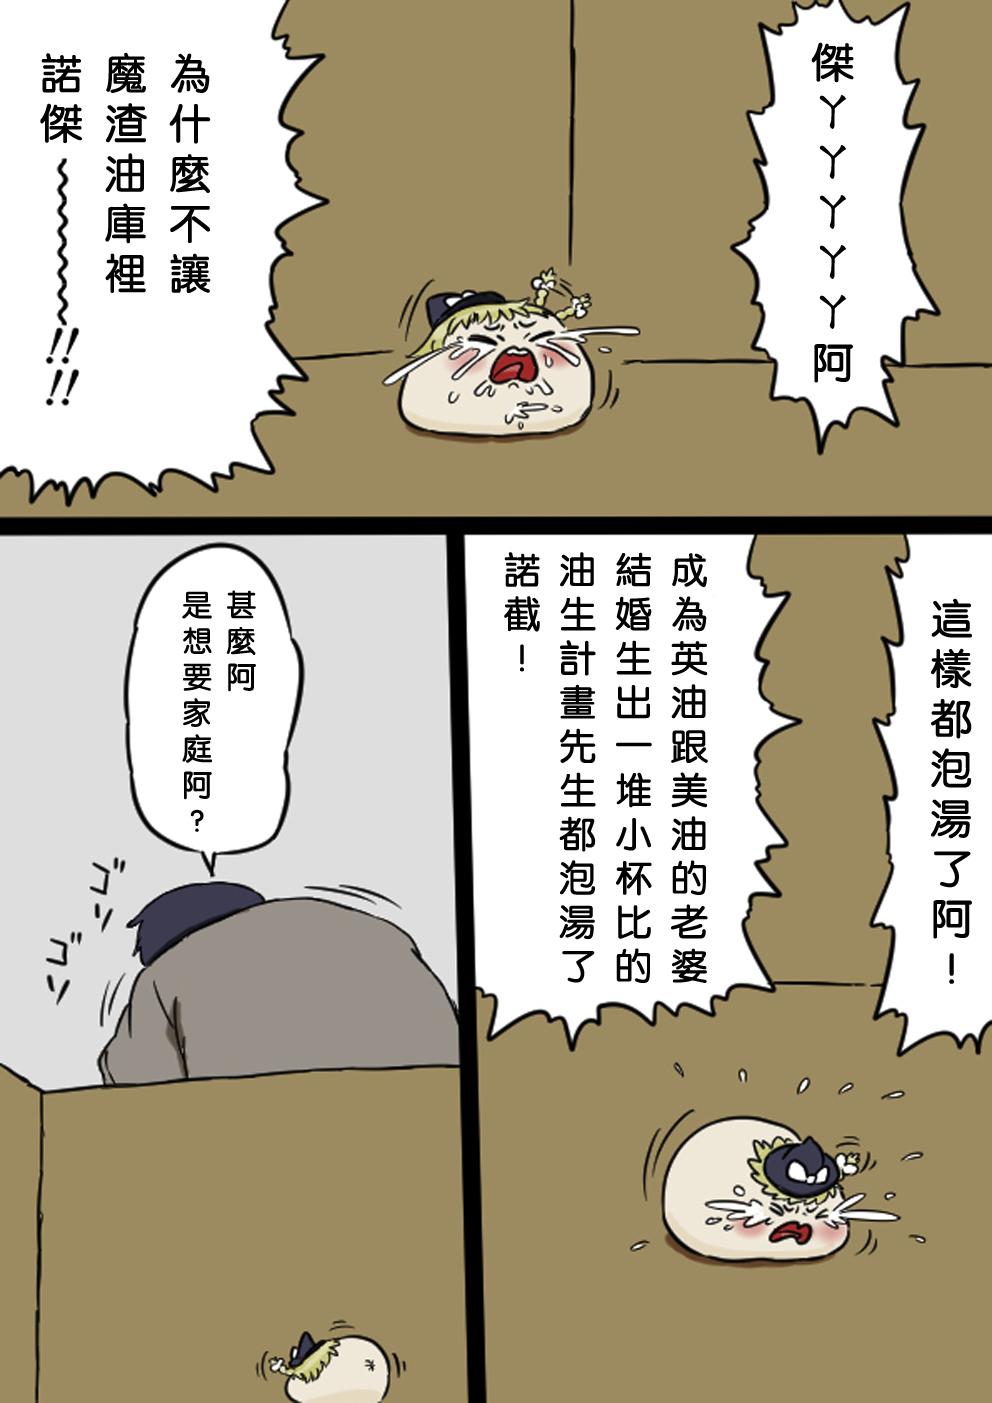 Safadinha すべてをてにいれたまりちゃ（Chinese） - Touhou project Ghetto - Page 9